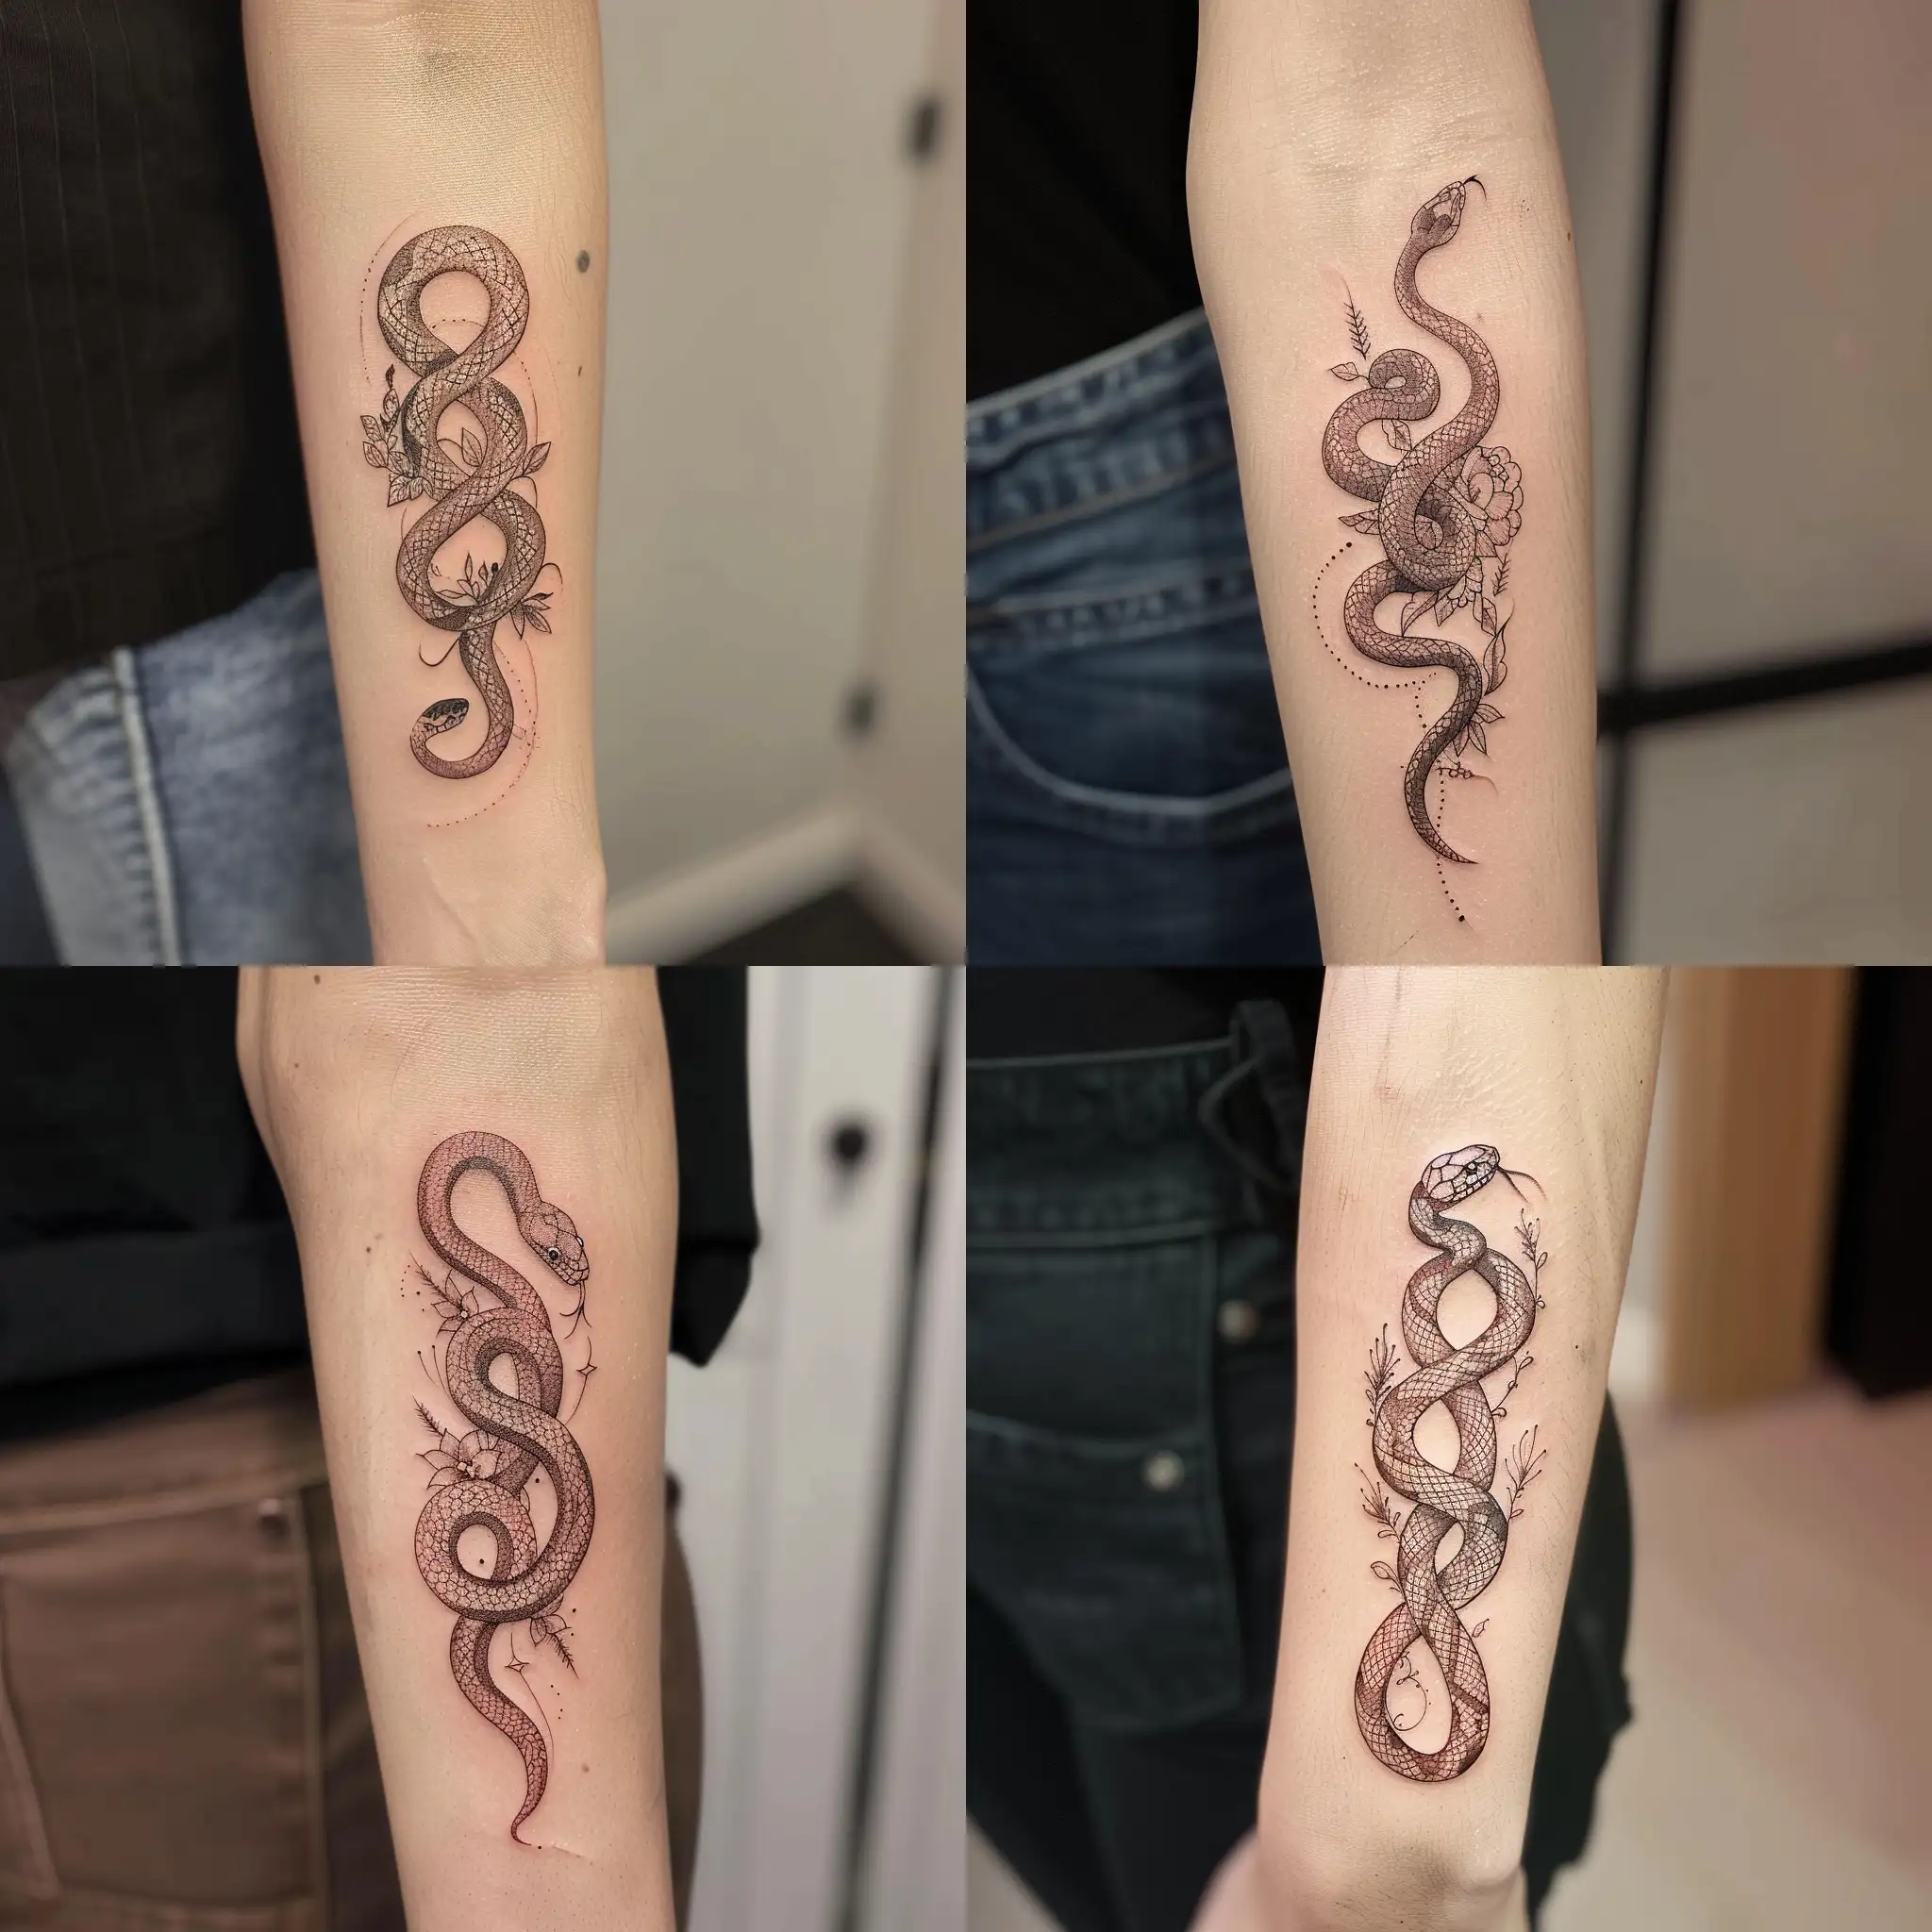 leave the snake tattoo unchanged, add a sketch of elements to it (for example, flowers or spikelets or something else) to make it more tender